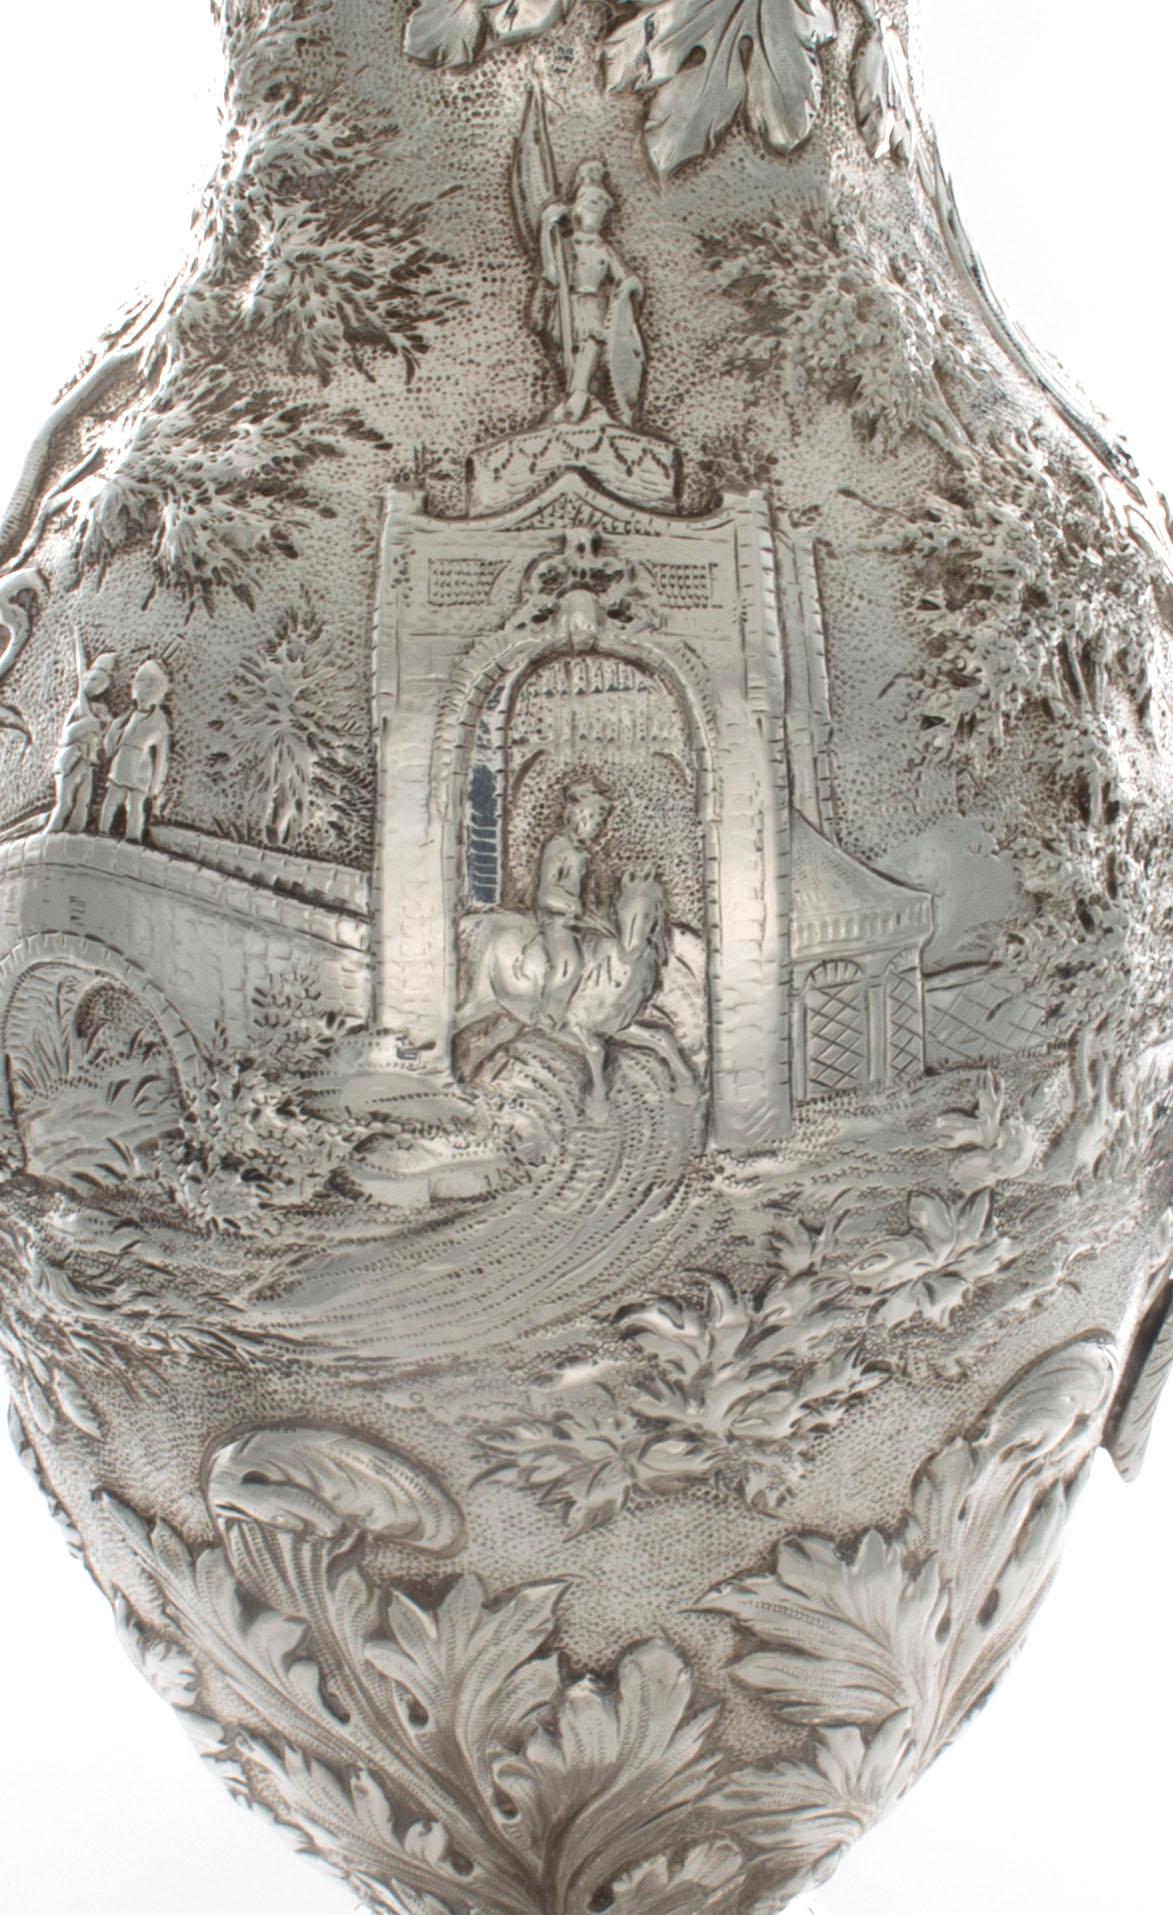 This outstanding S. Kirk & Son Ewer features scenes of a man on horseback leaving home going across a bridge, through the gatehouse, and across the water that features ducks in the water. The design surrounds the entire ewer. There is well executed